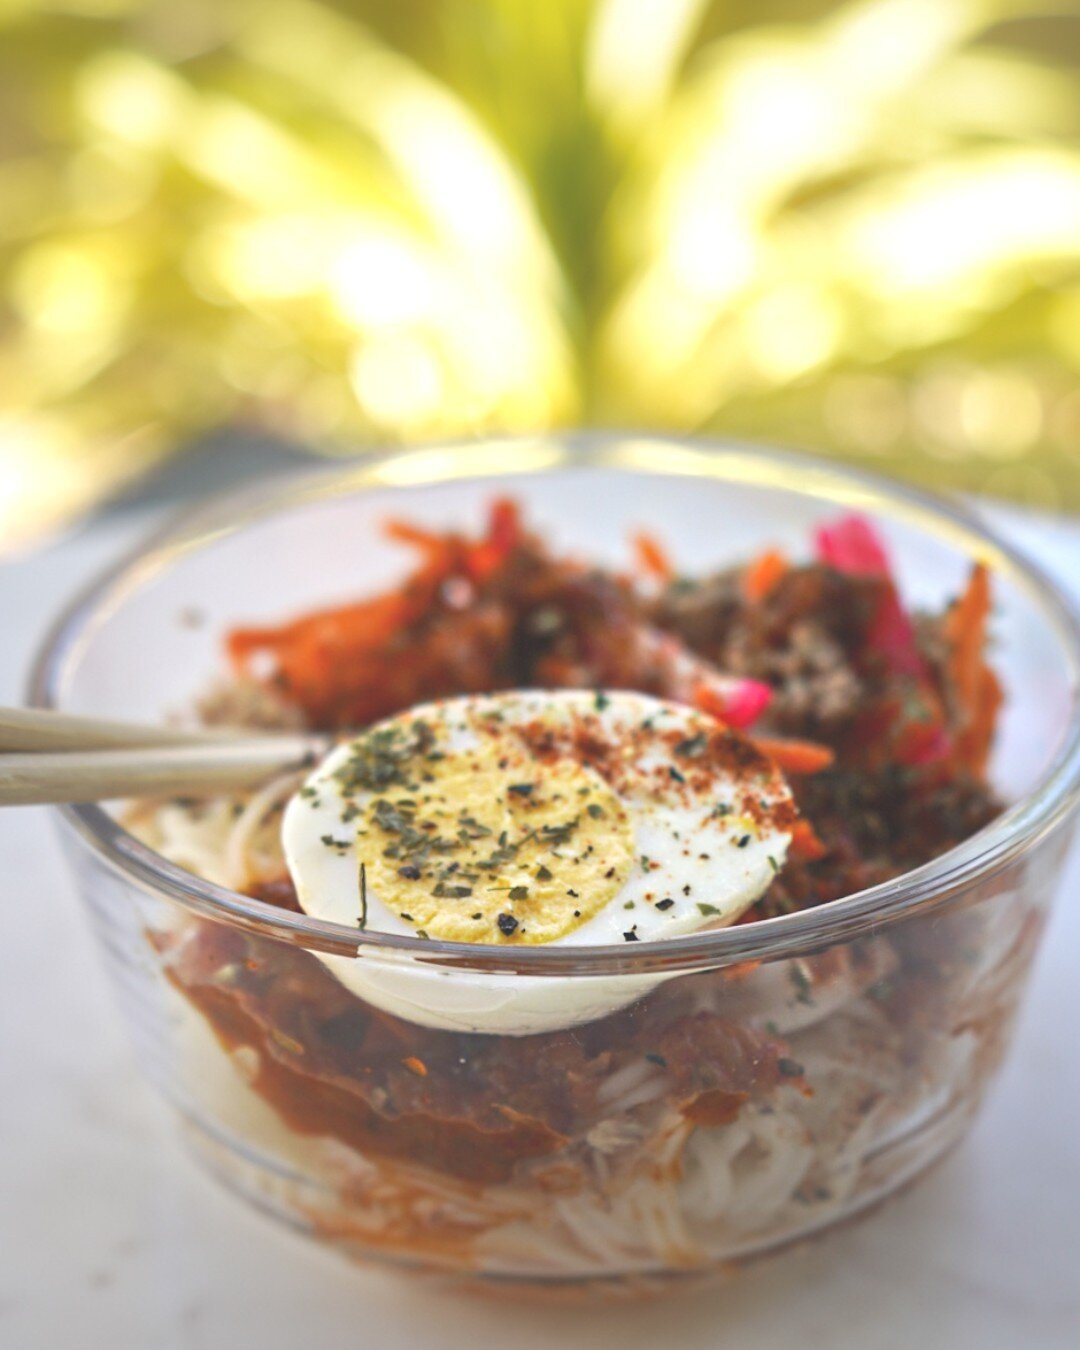 We love a good noodle bowl with an egg on top - what do you like to add in yours?